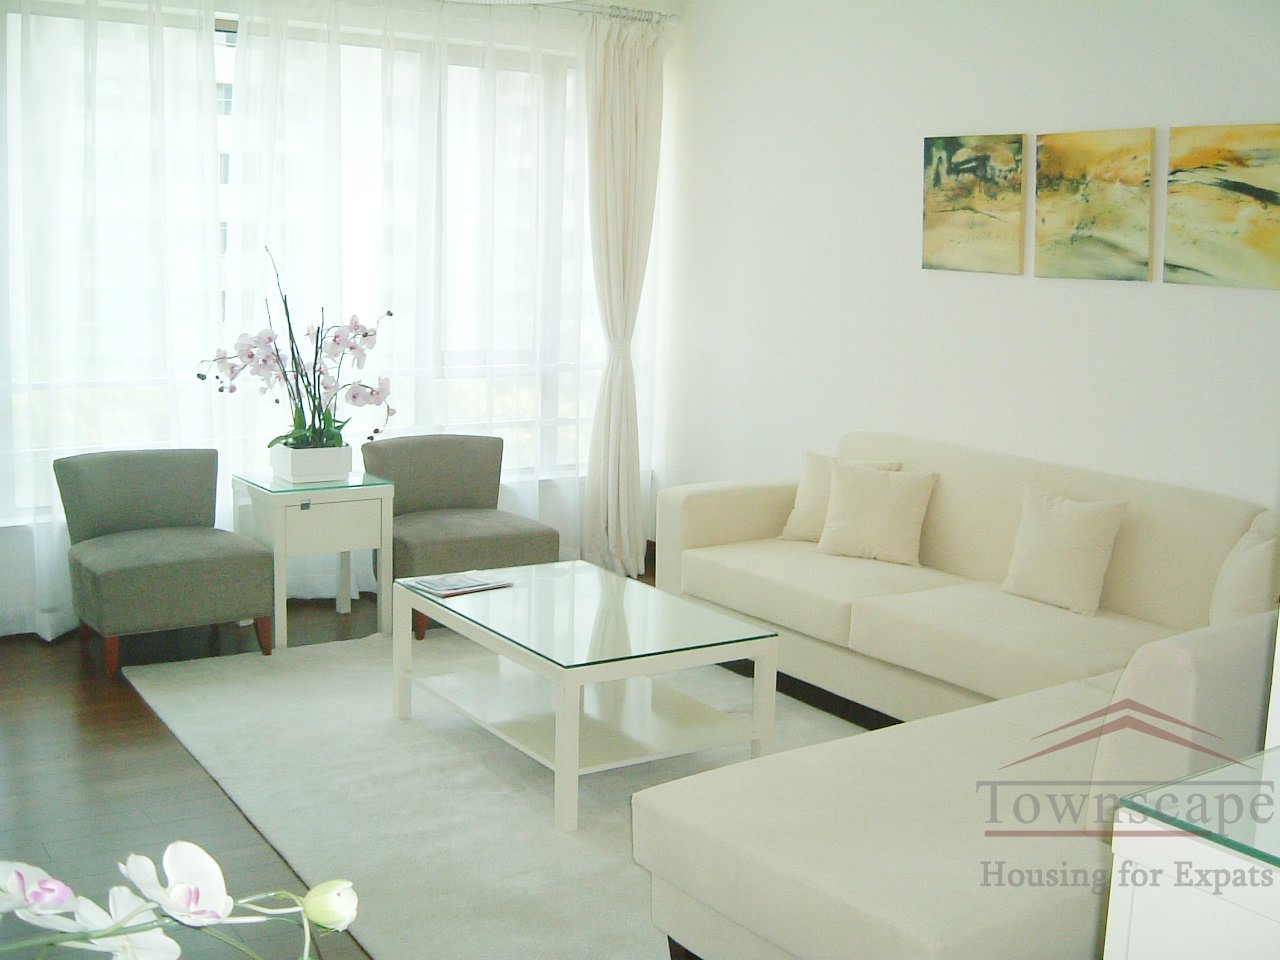 3br apartment Pudong Modern 3BR Apartment in Pudong, next to Century Park